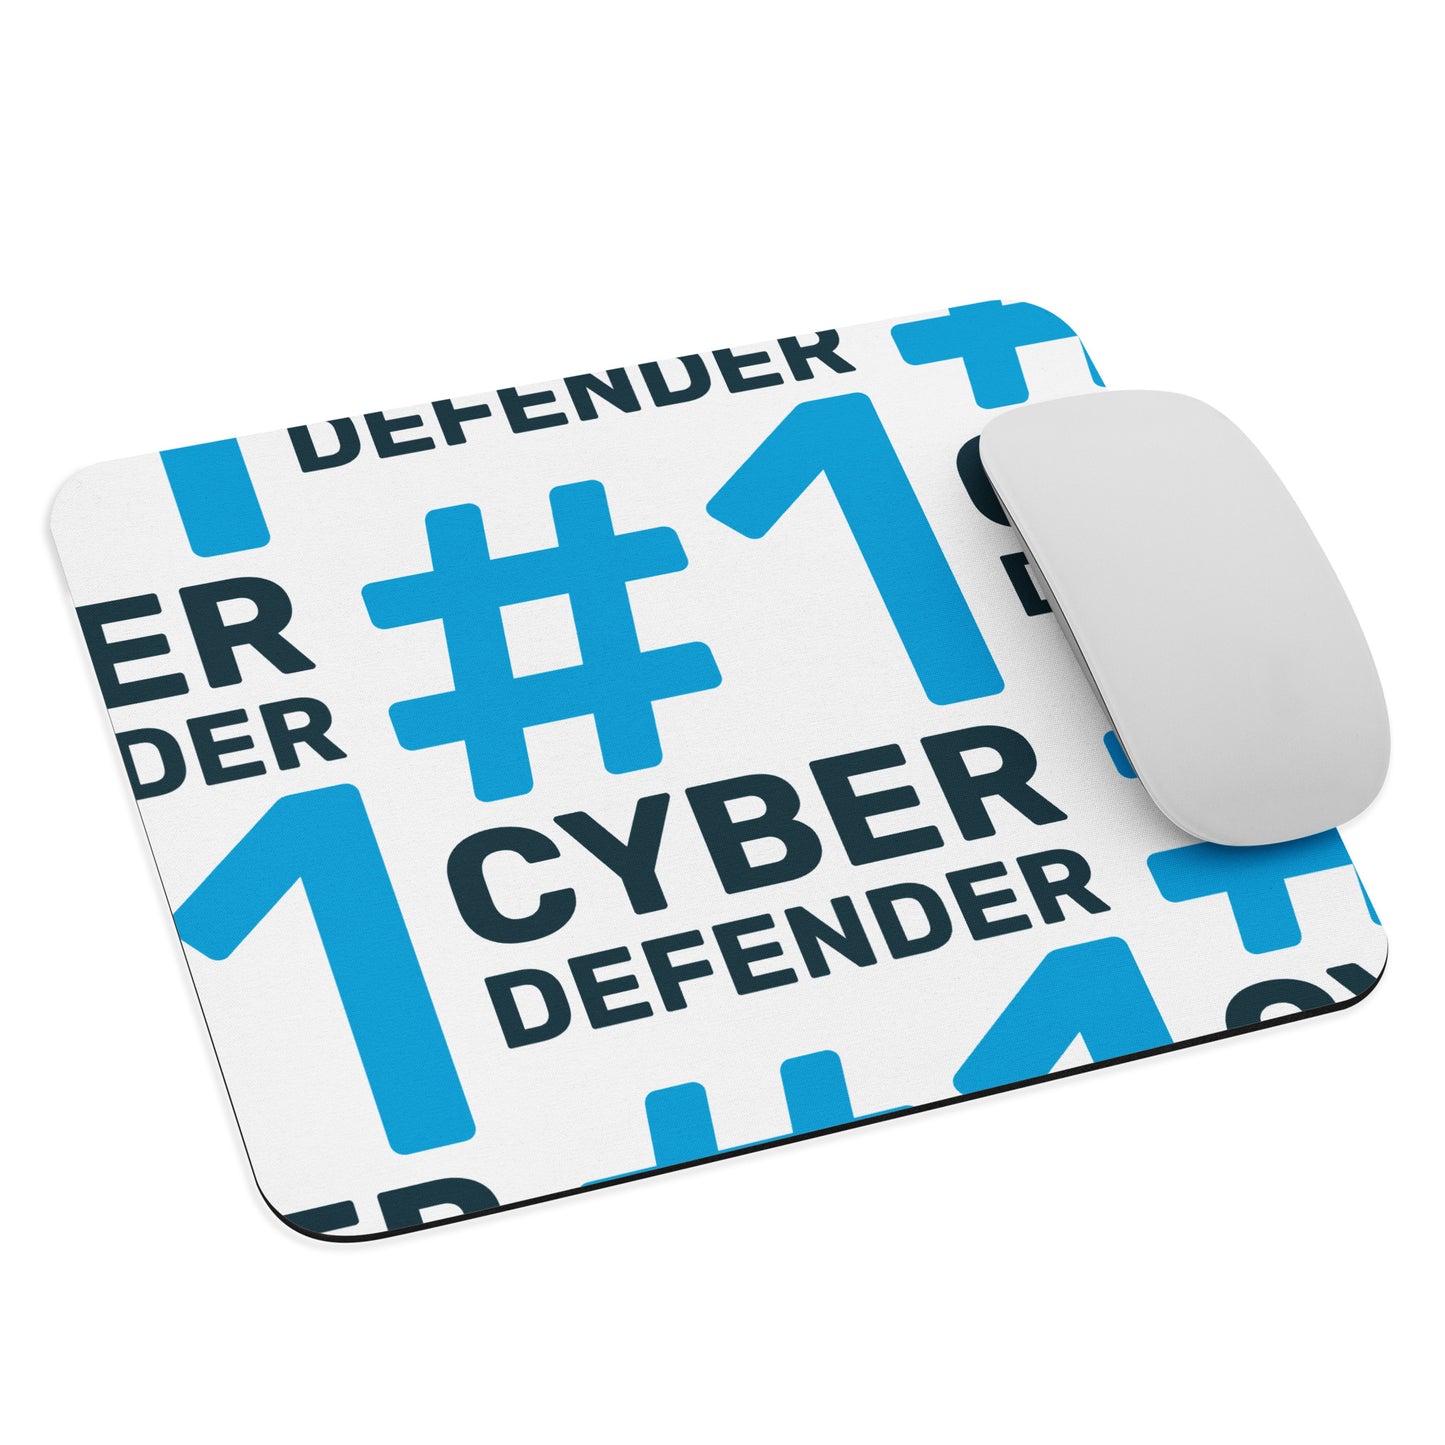 #1Cyber Defender Mouse Pad